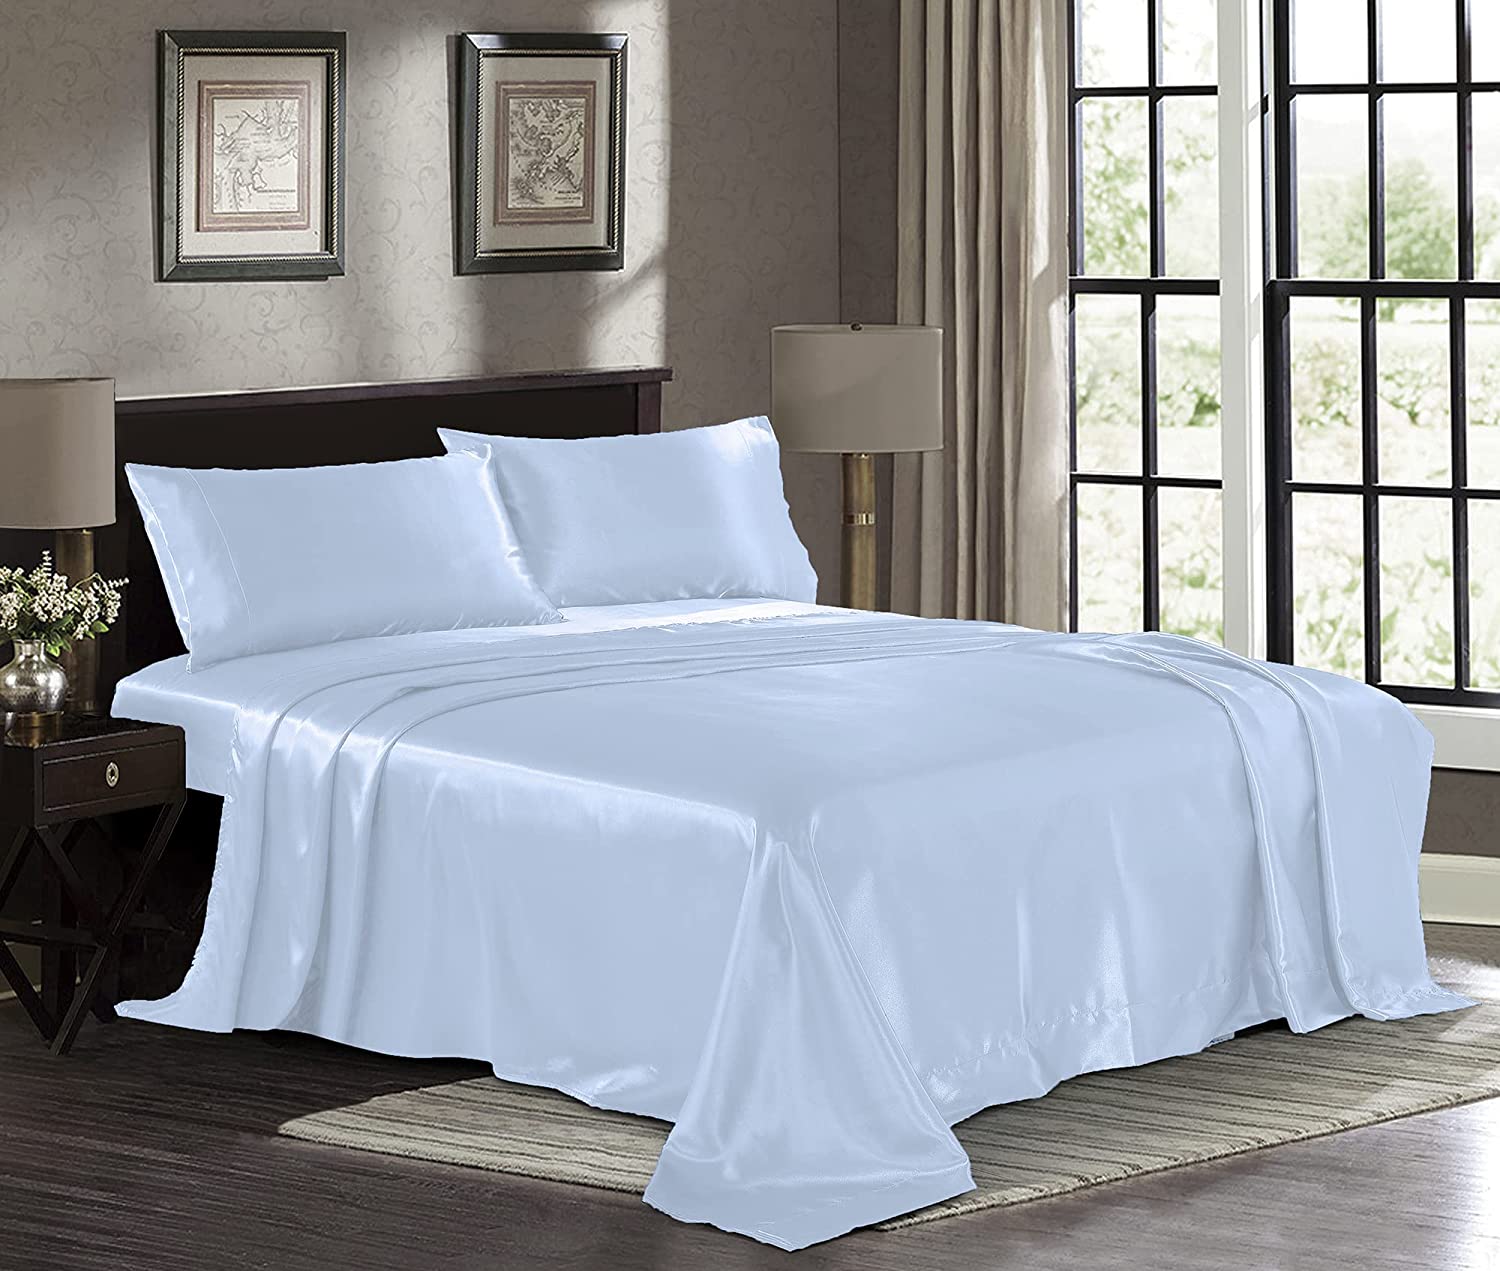 PURE BEDDING Easy Care Silky Satin Sheets, 4-Piece